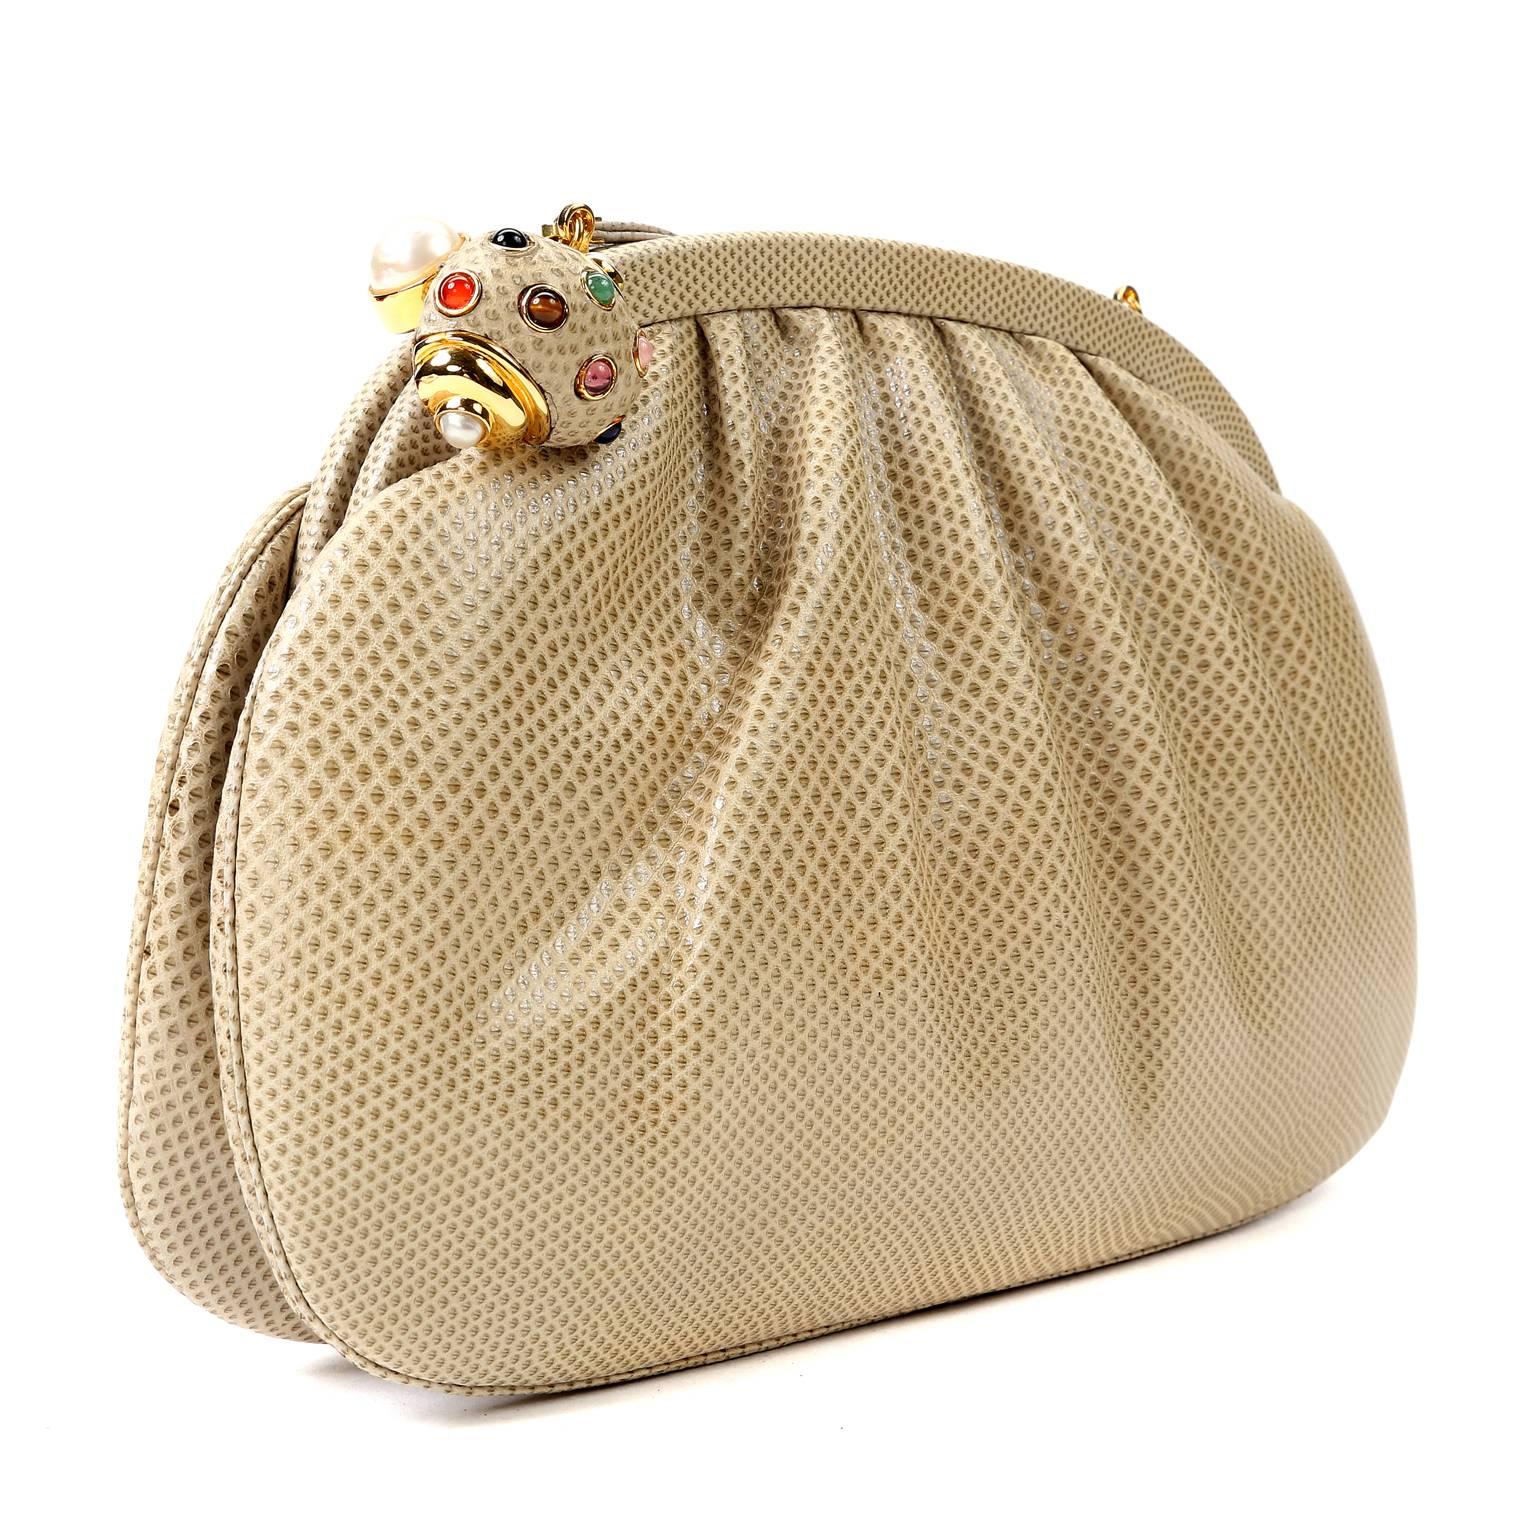 Judith Leiber Beige Lizard Evening Bag- EXCELLENT PLUS
The medium sized silhouette is conveniently sized for those who like to carry a bit more than a lipstick.
 
Beige lizard skin clutch is framed at the top with a bejeweled snail clasp sitting